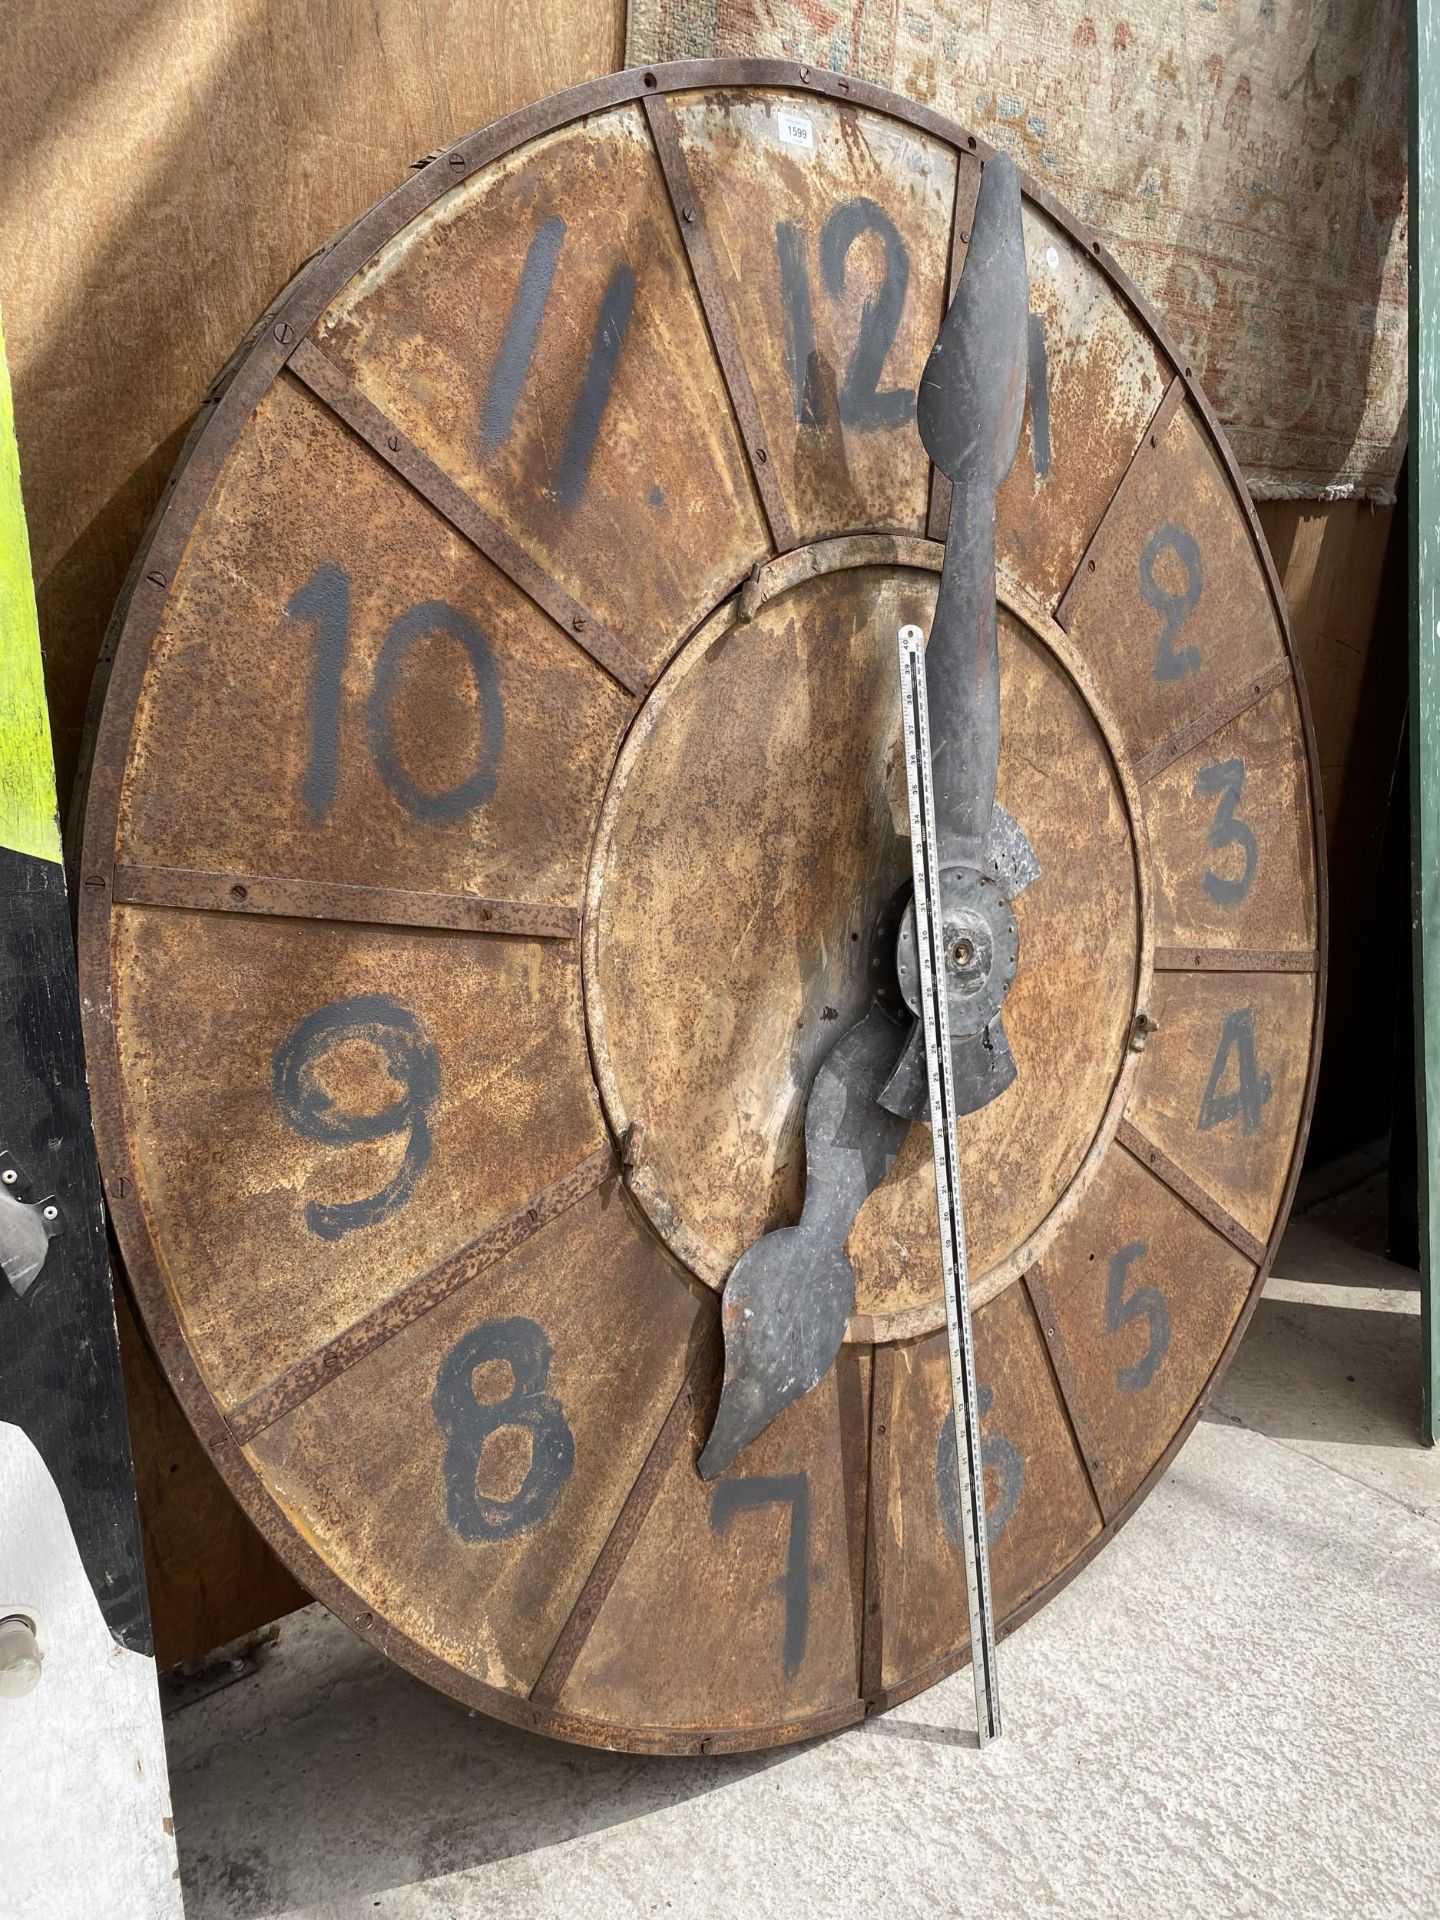 A VINTAGE METAL AND WOODEN LARGE FRENCH CLOCK COMPLETE WITH WORKINGS - Image 3 of 4